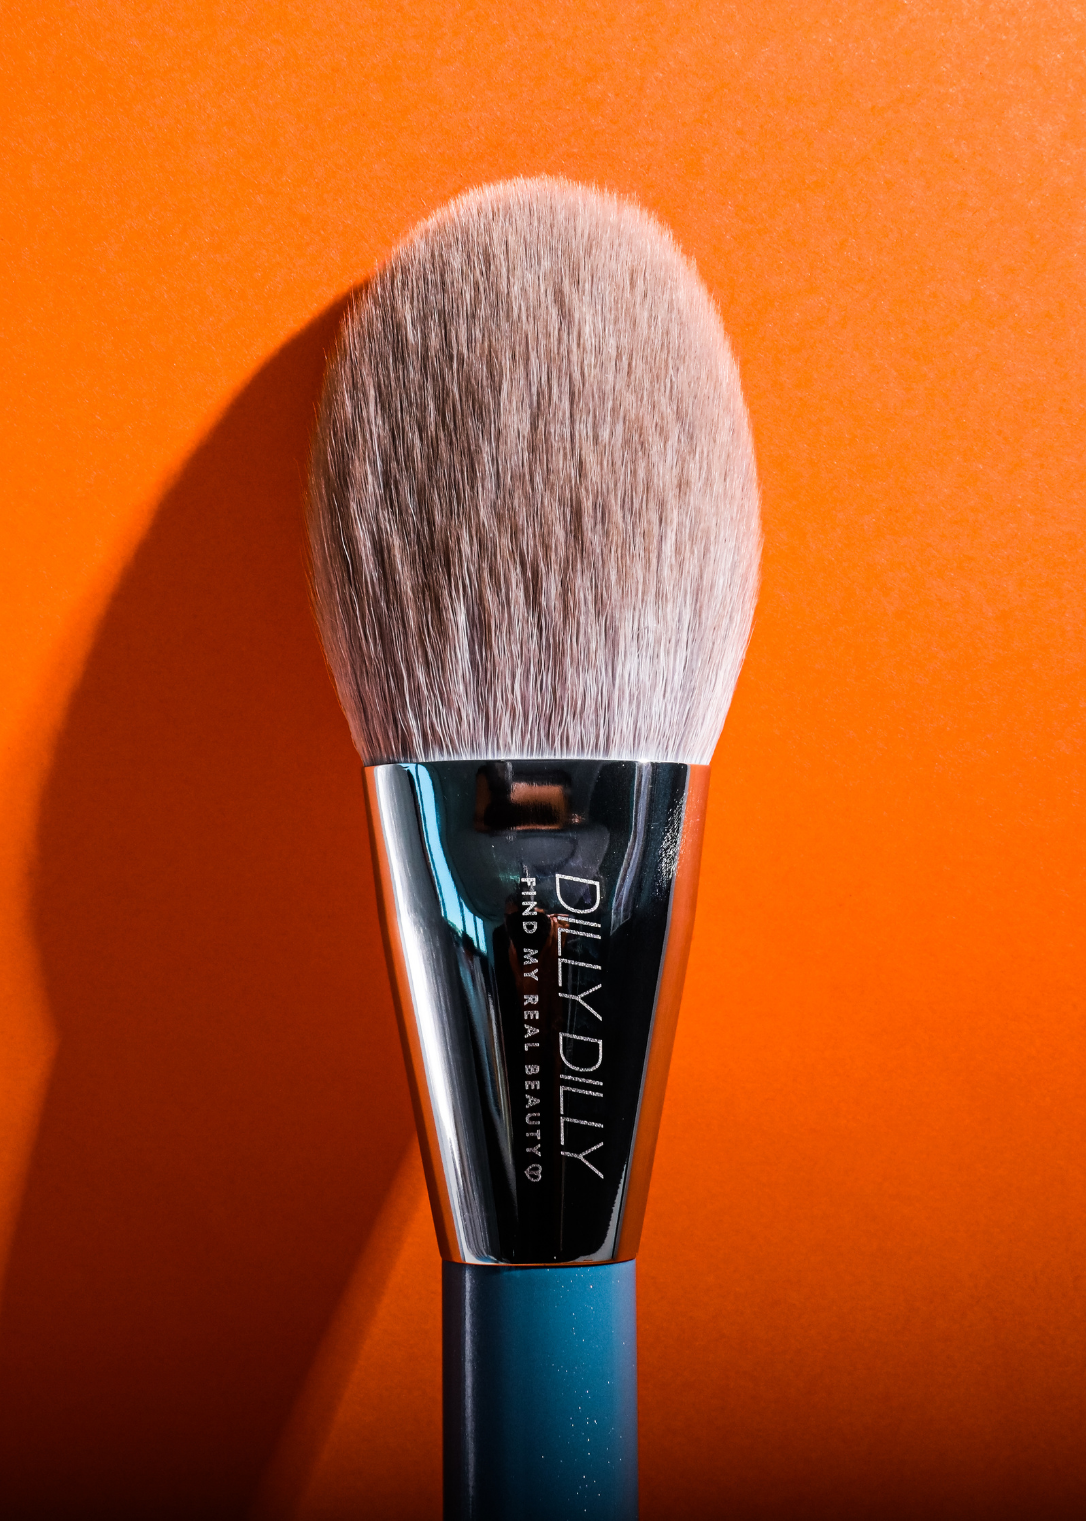 Luxe Feather Setting Powder Brush